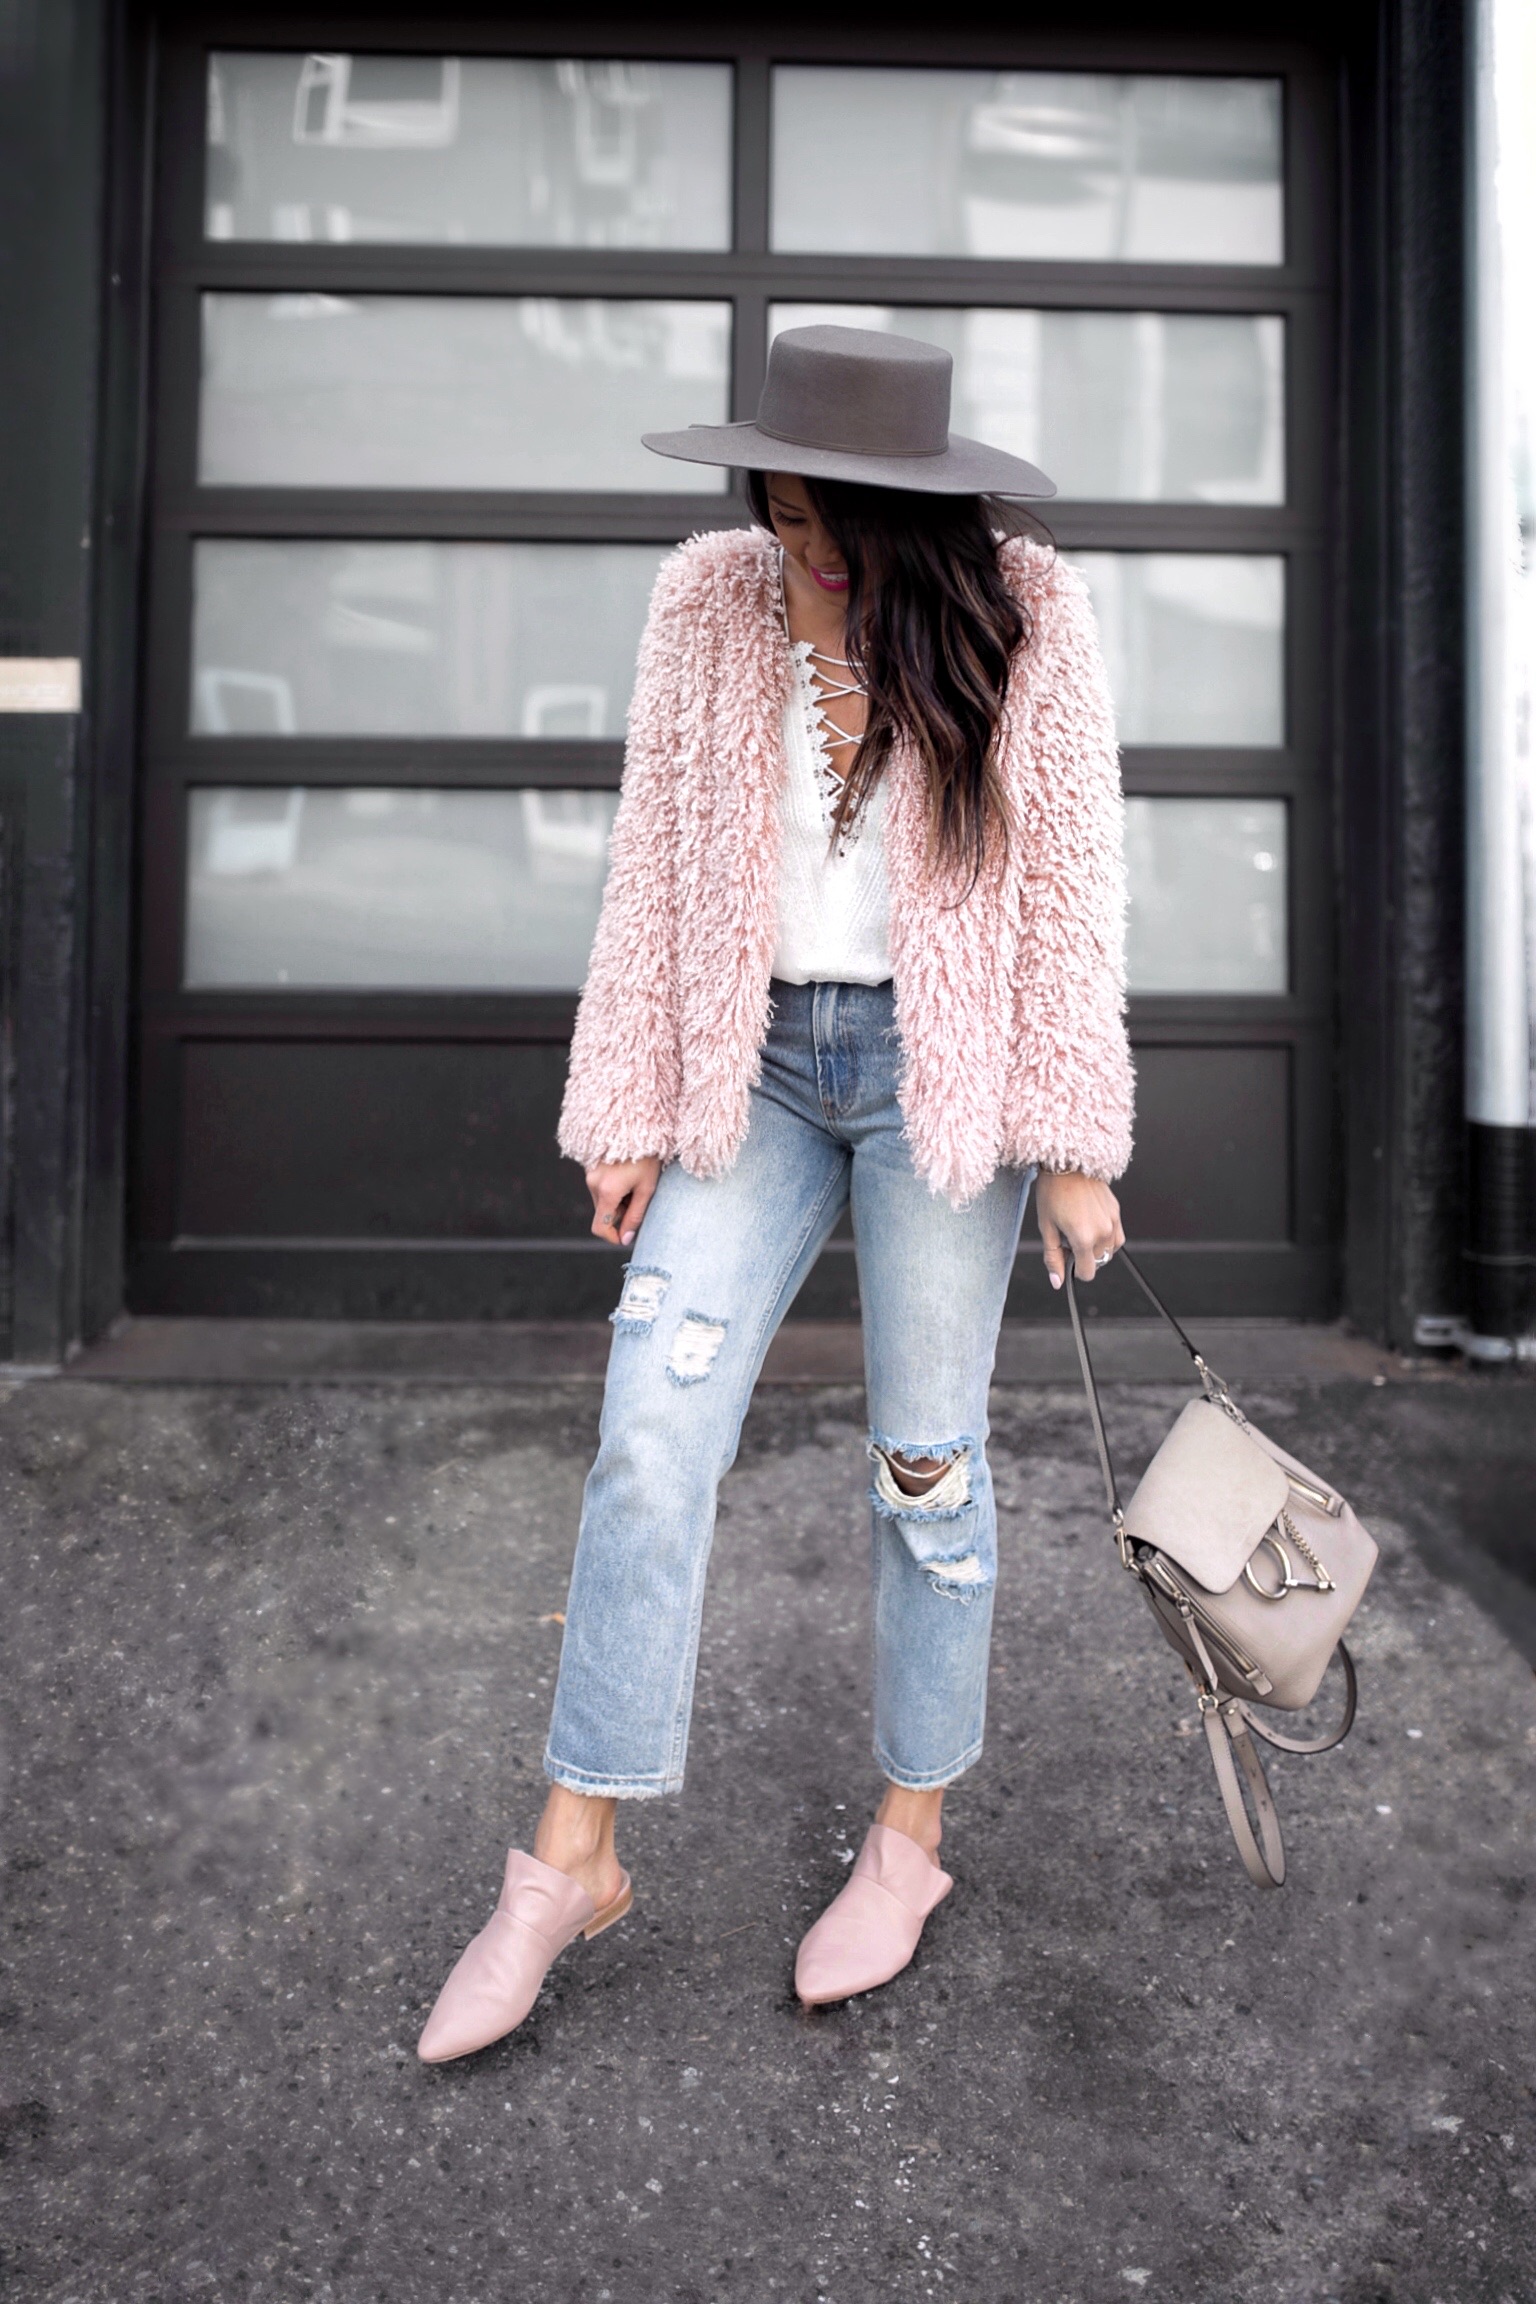 How to casually wear pink shaggy jacket